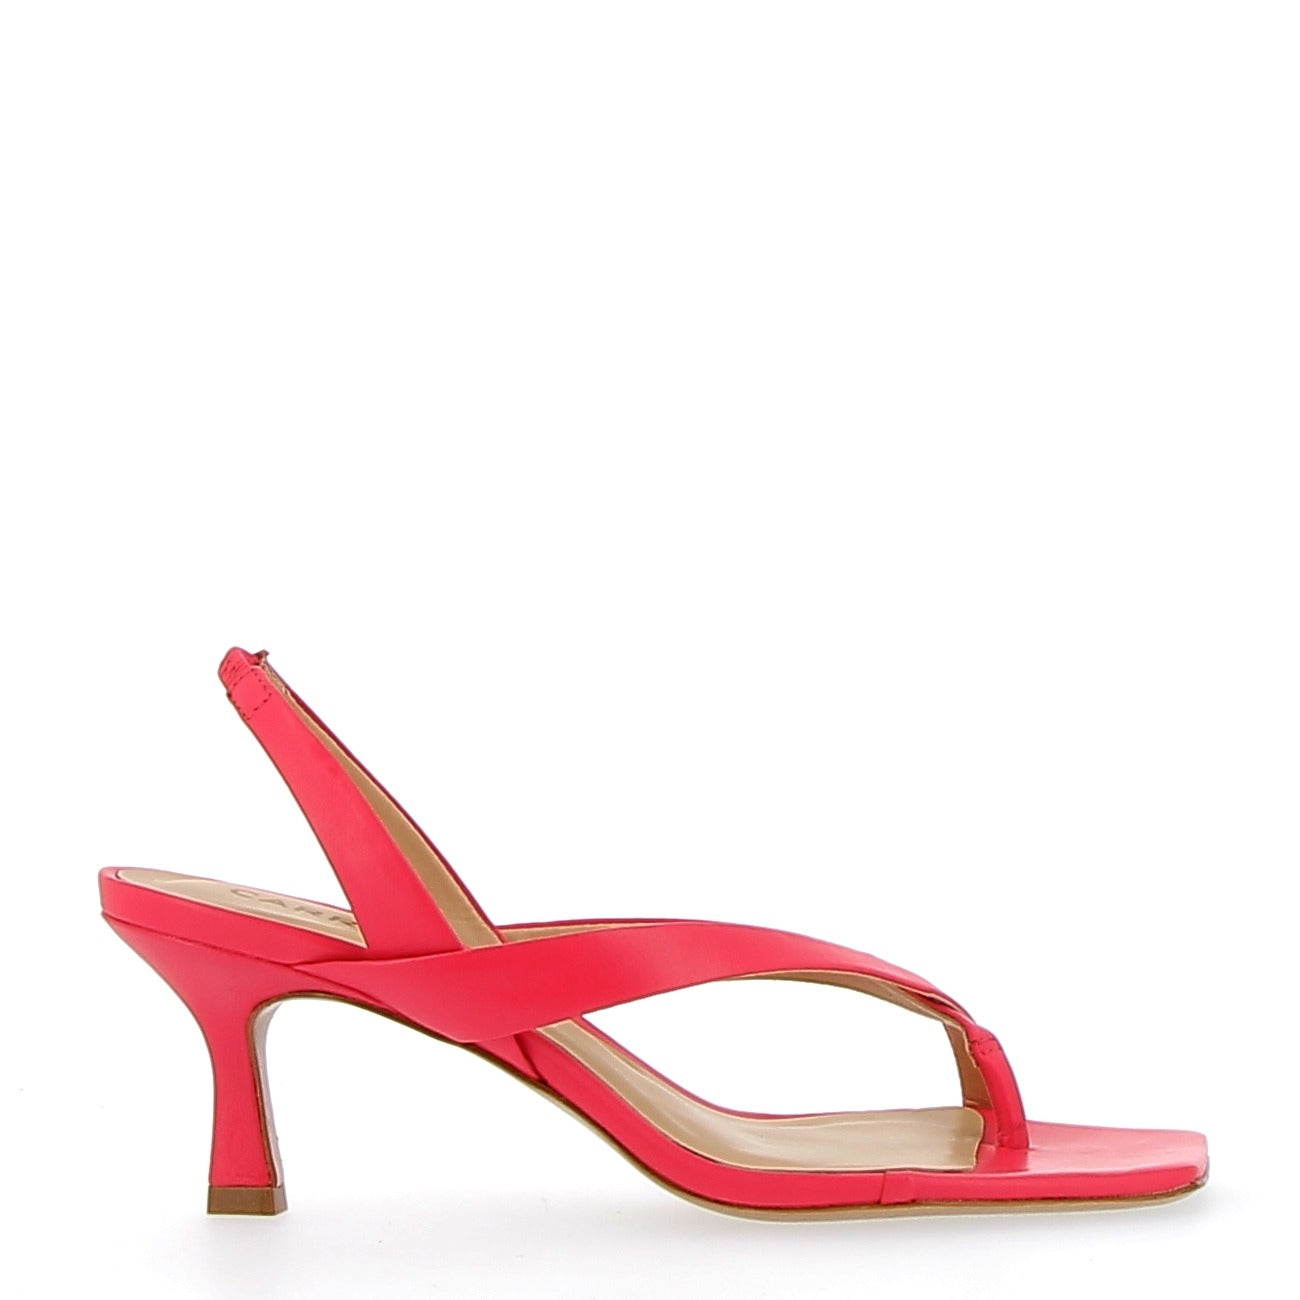 Strawberry leather sandal with heel